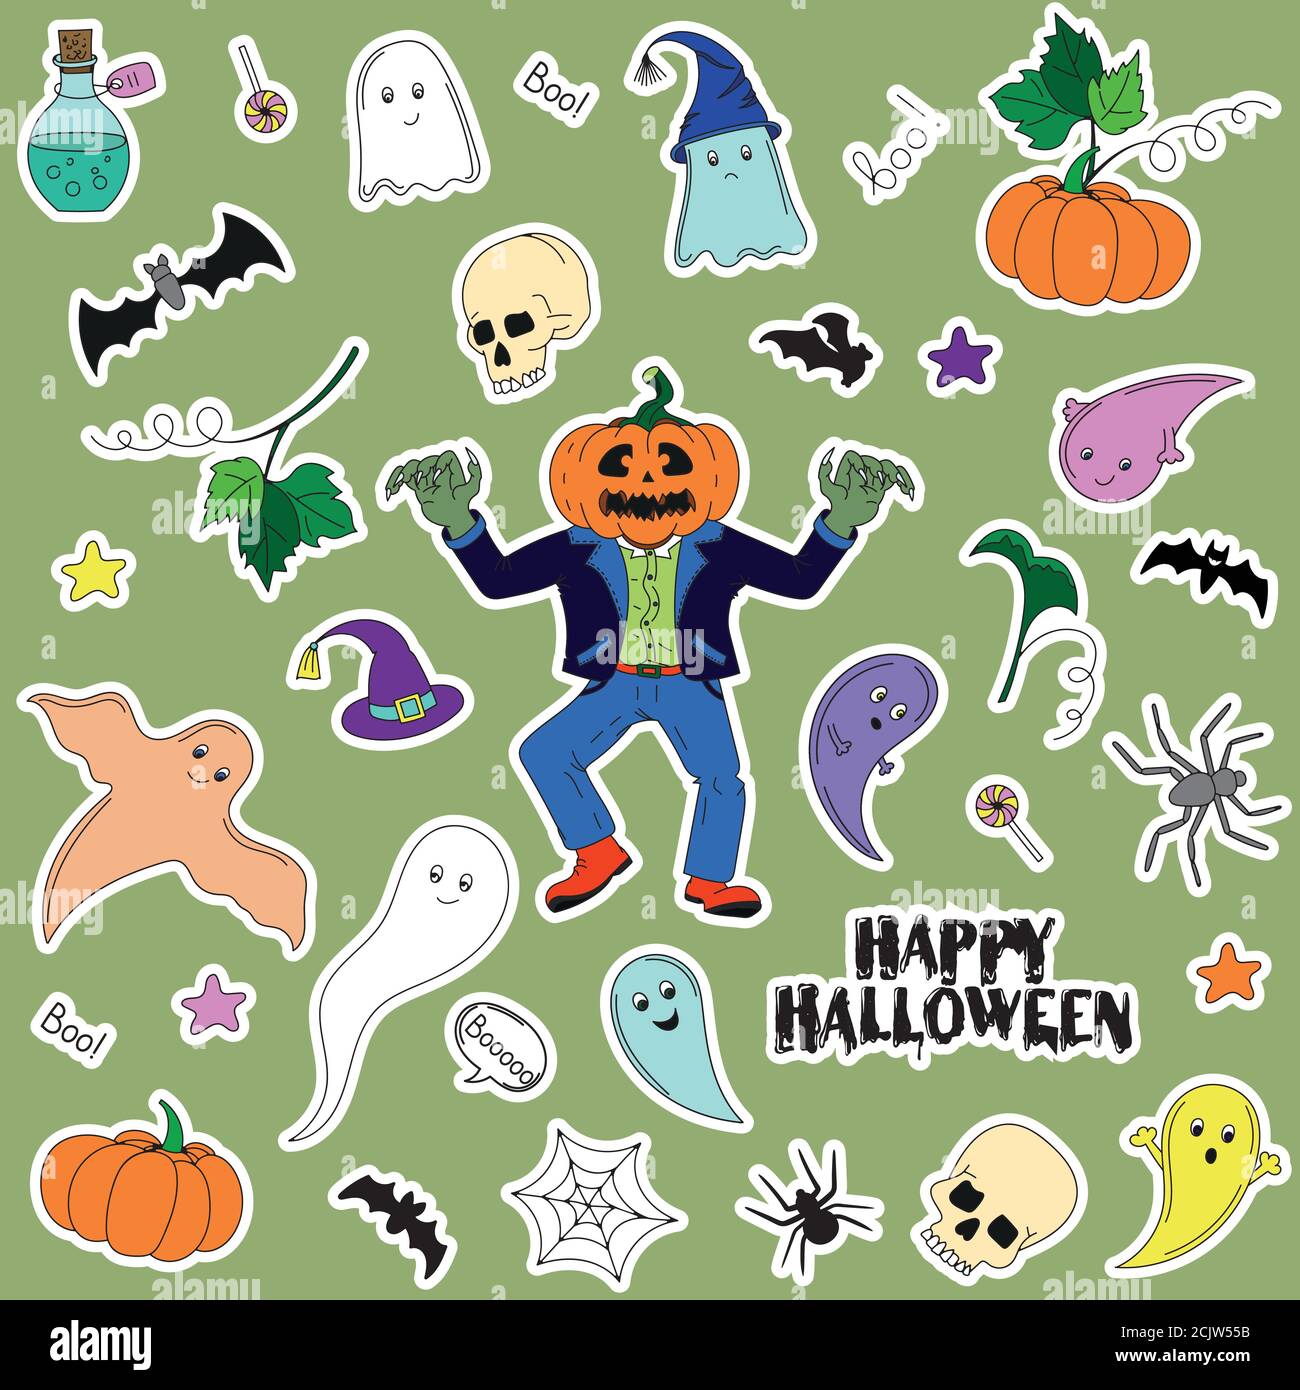 Halloween stickers with ghosts, pumpkins, skulls. in cartoon style. Cute vector icons for Halloween Stock Vector